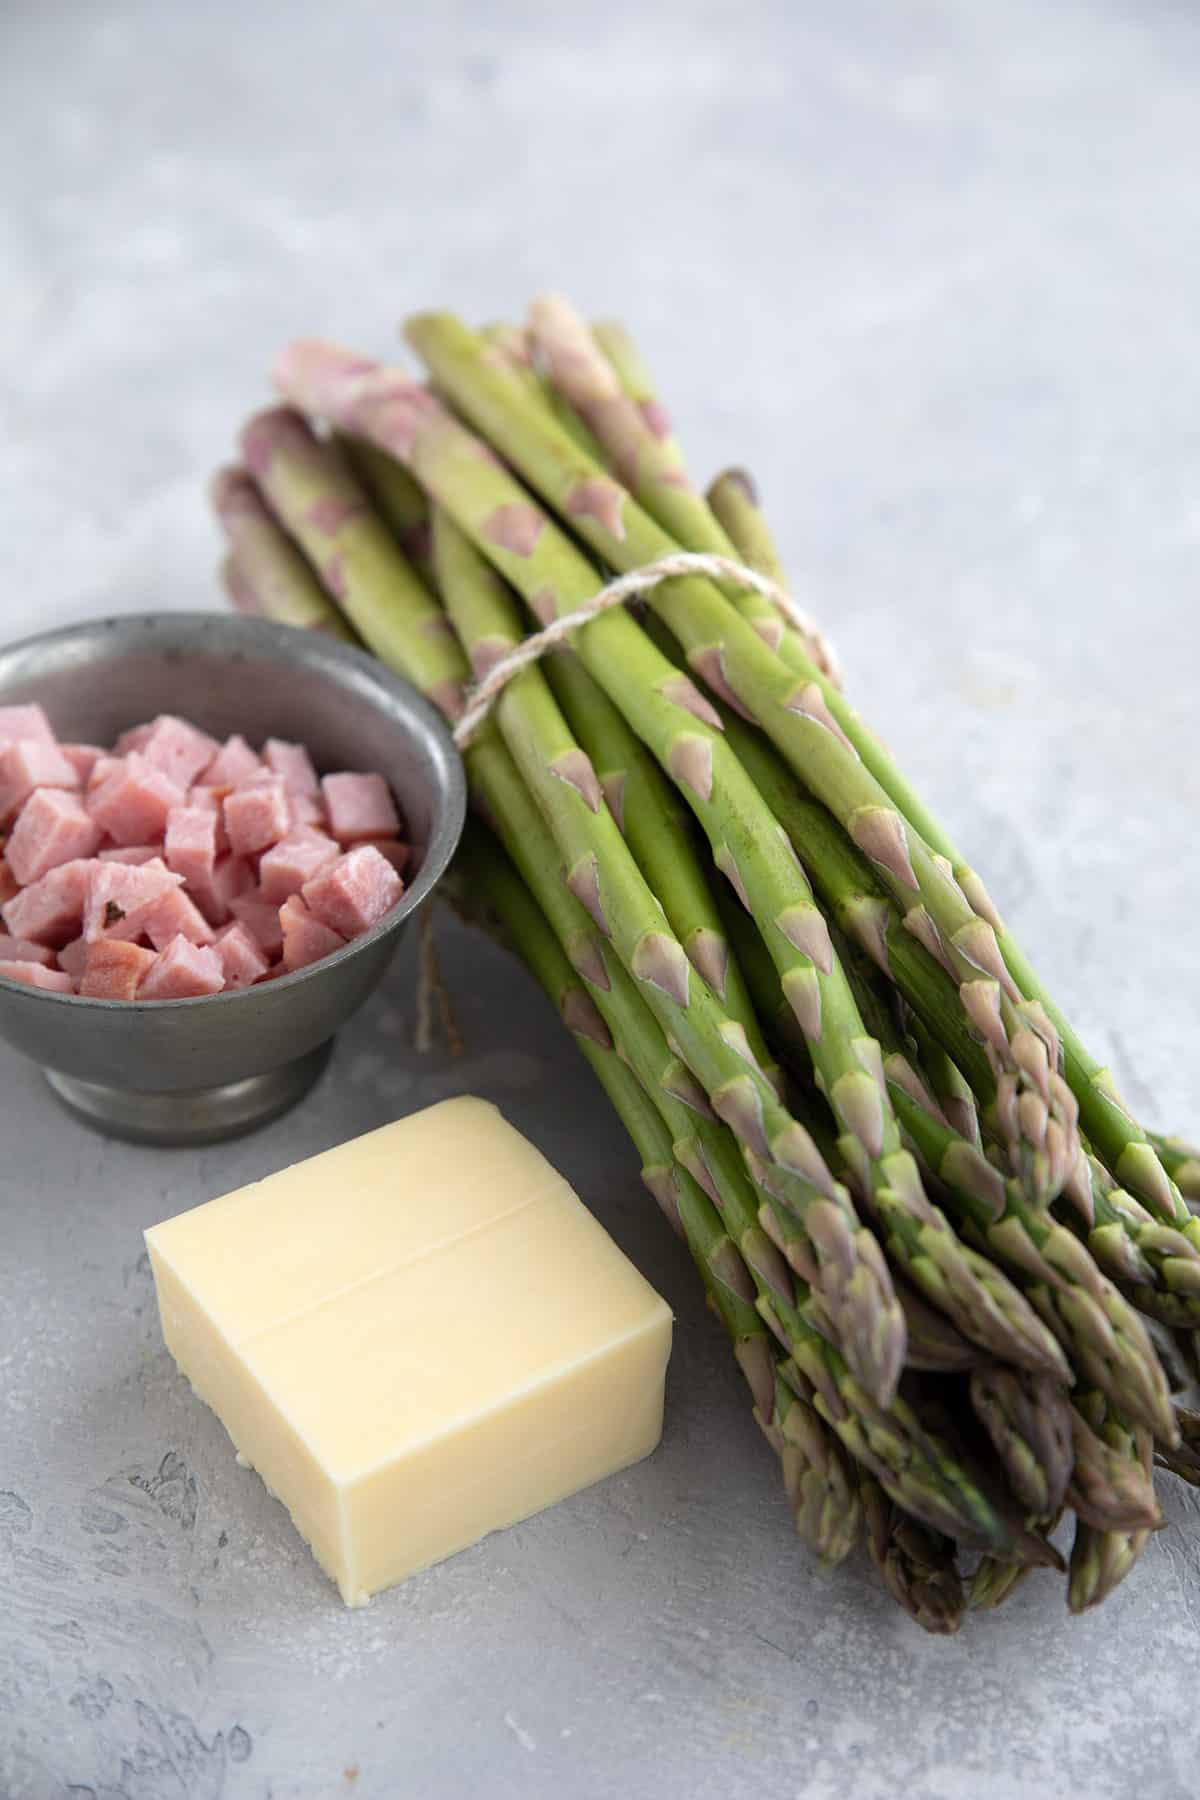 Asparagus, ham, and cheese on a gray table.